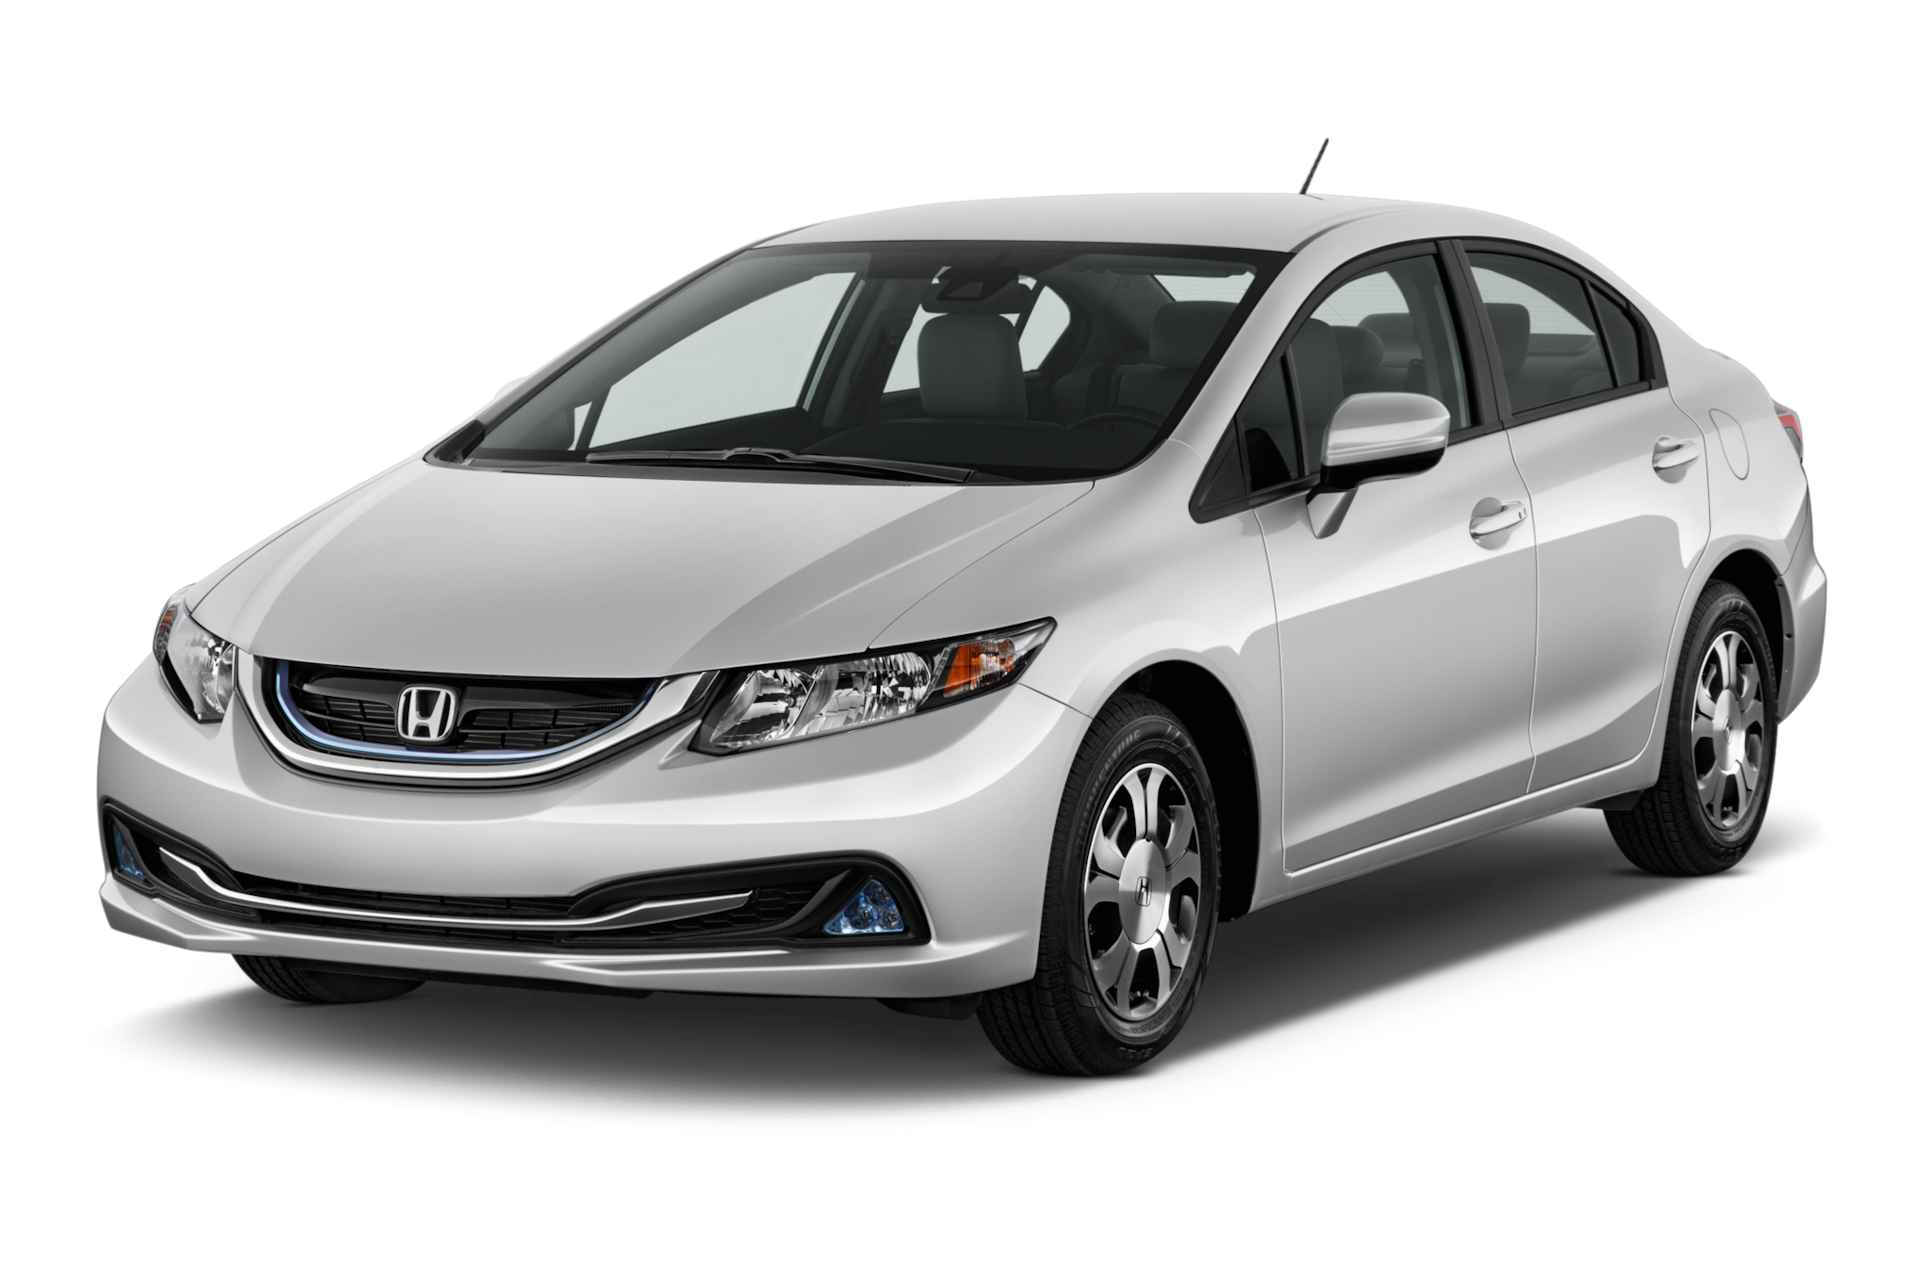 2015 Honda Civic Hybrid Prices, Reviews, and Photos - MotorTrend